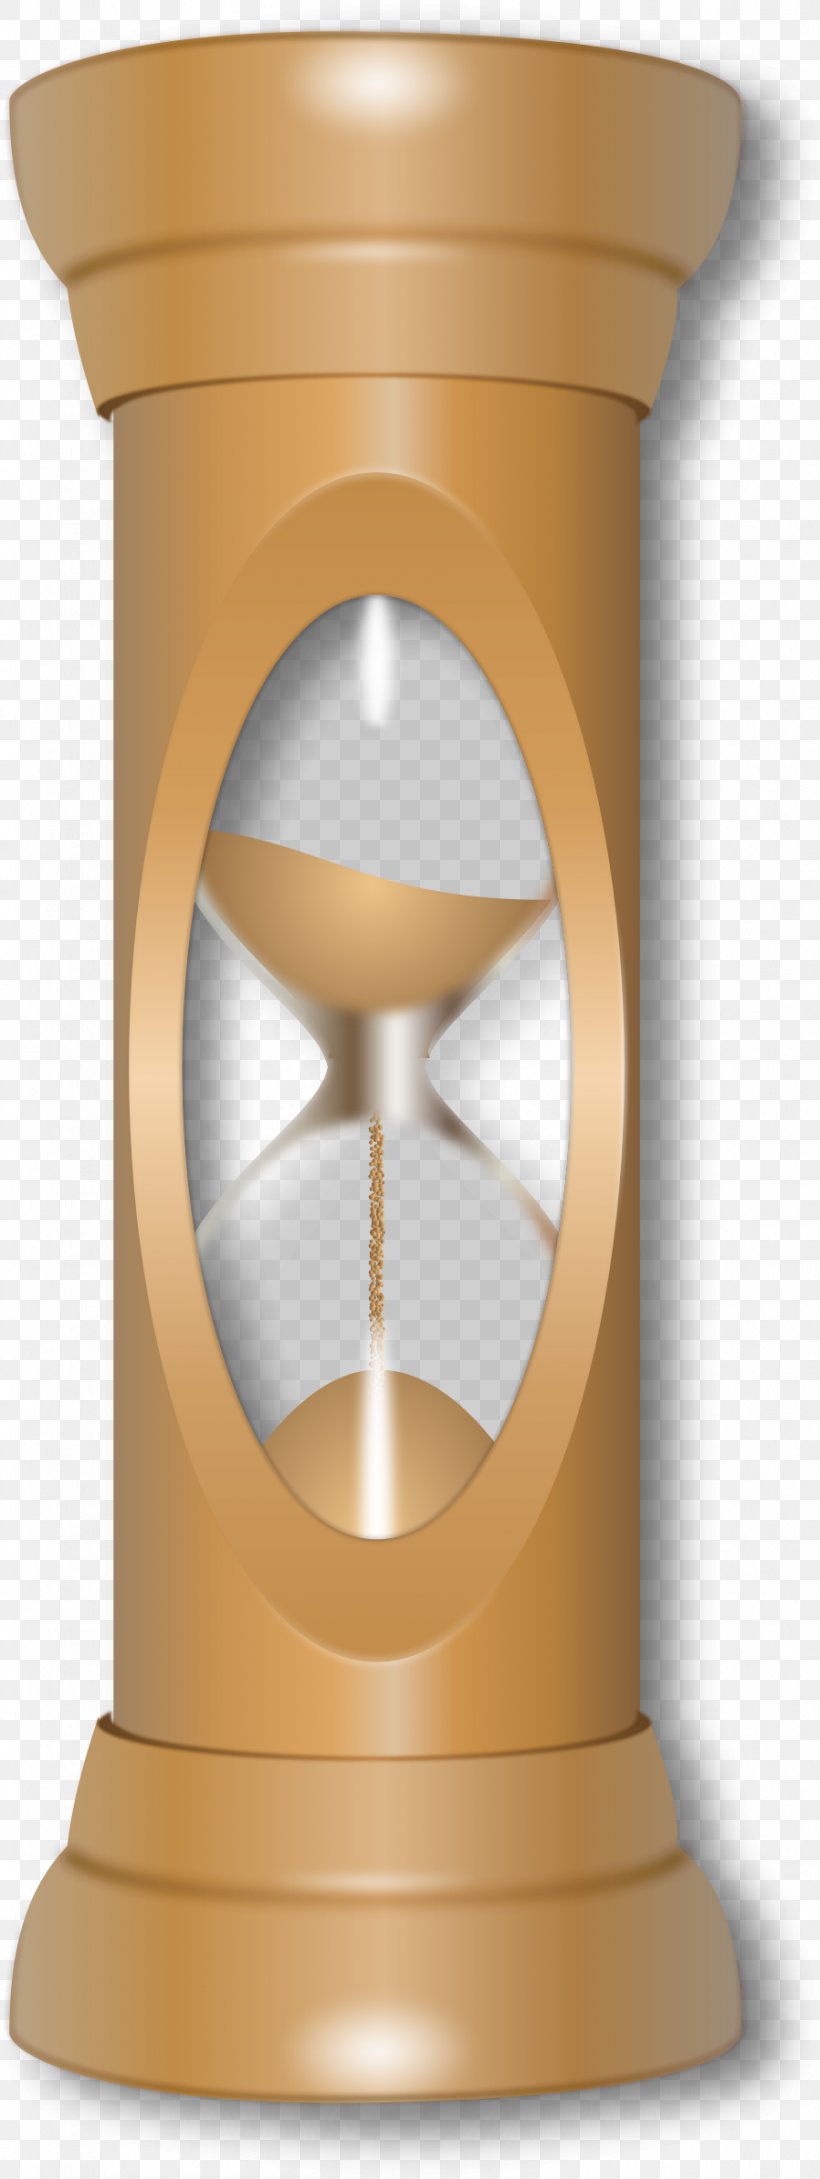 Hourglass Time & Attendance Clocks, PNG, 898x2387px, Hourglass, Clock, Era, Future, Past Download Free